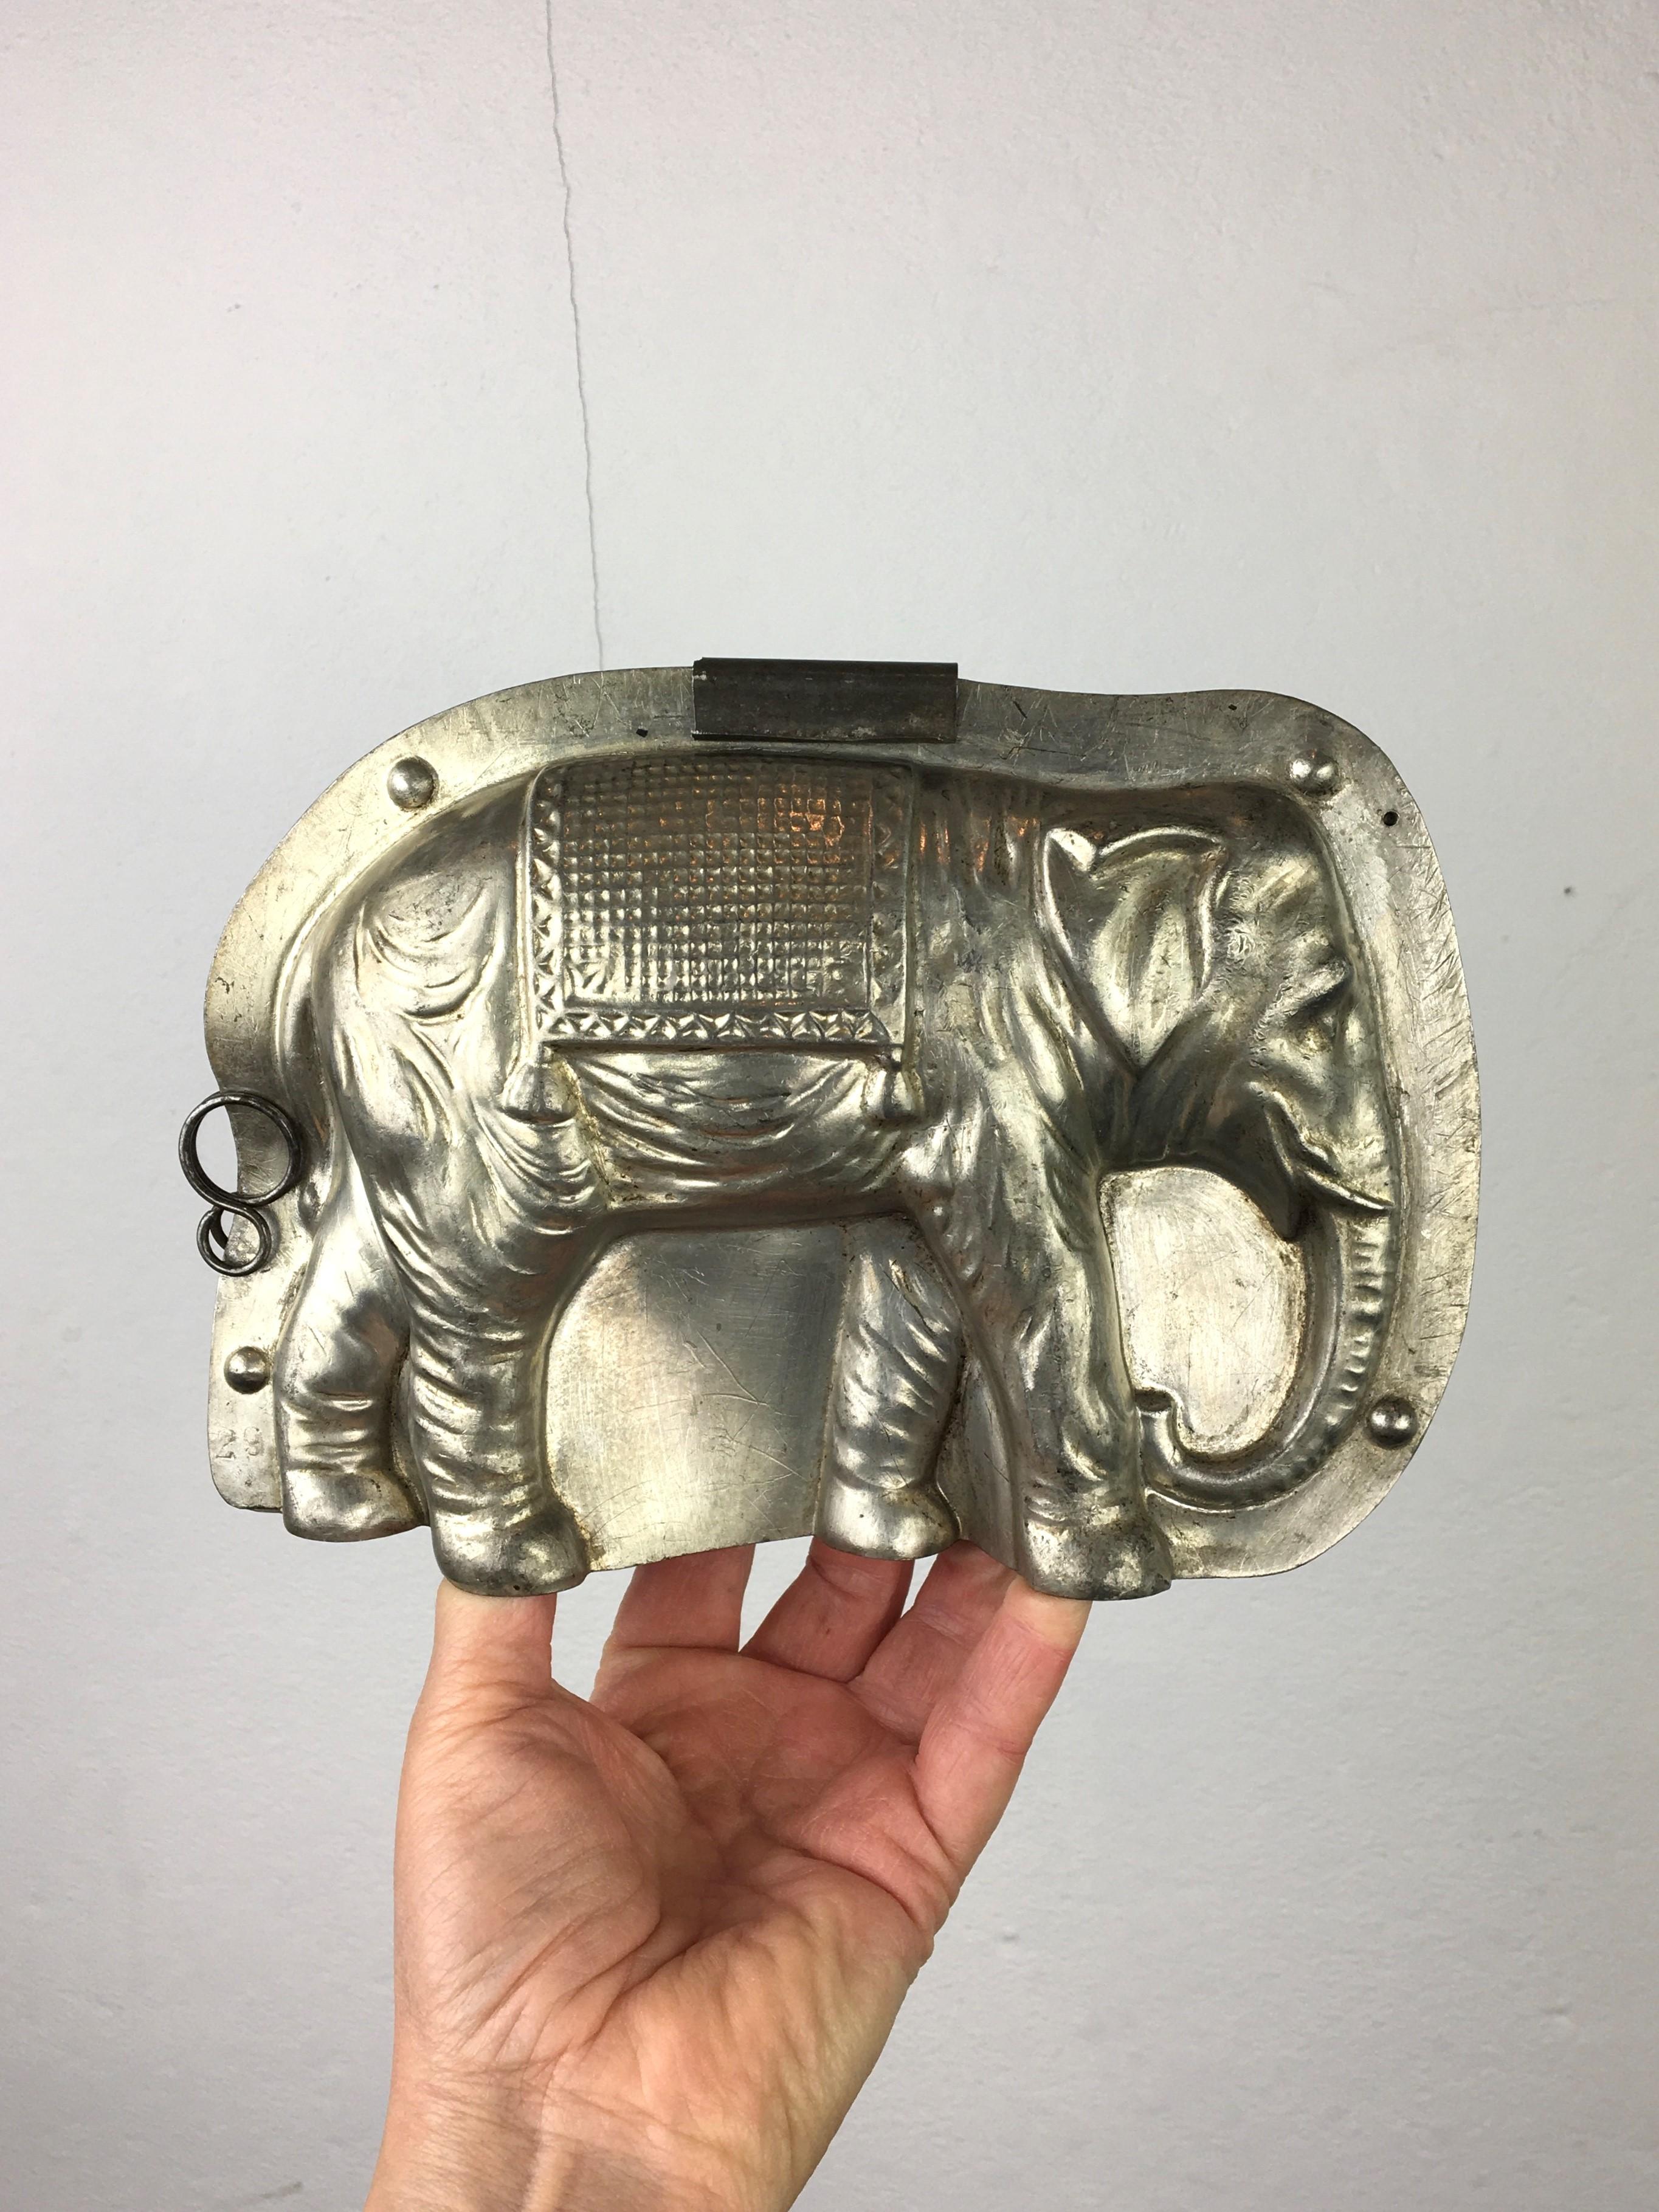 Elephant chocolate mold. 
This old vintage chocolate mold is large ! 
Beautiful walking elephant with the typical blanket on his back. 
Made of metal - not marked or numbered. 
For use or for decorative purpose. 

Elephant collectables -